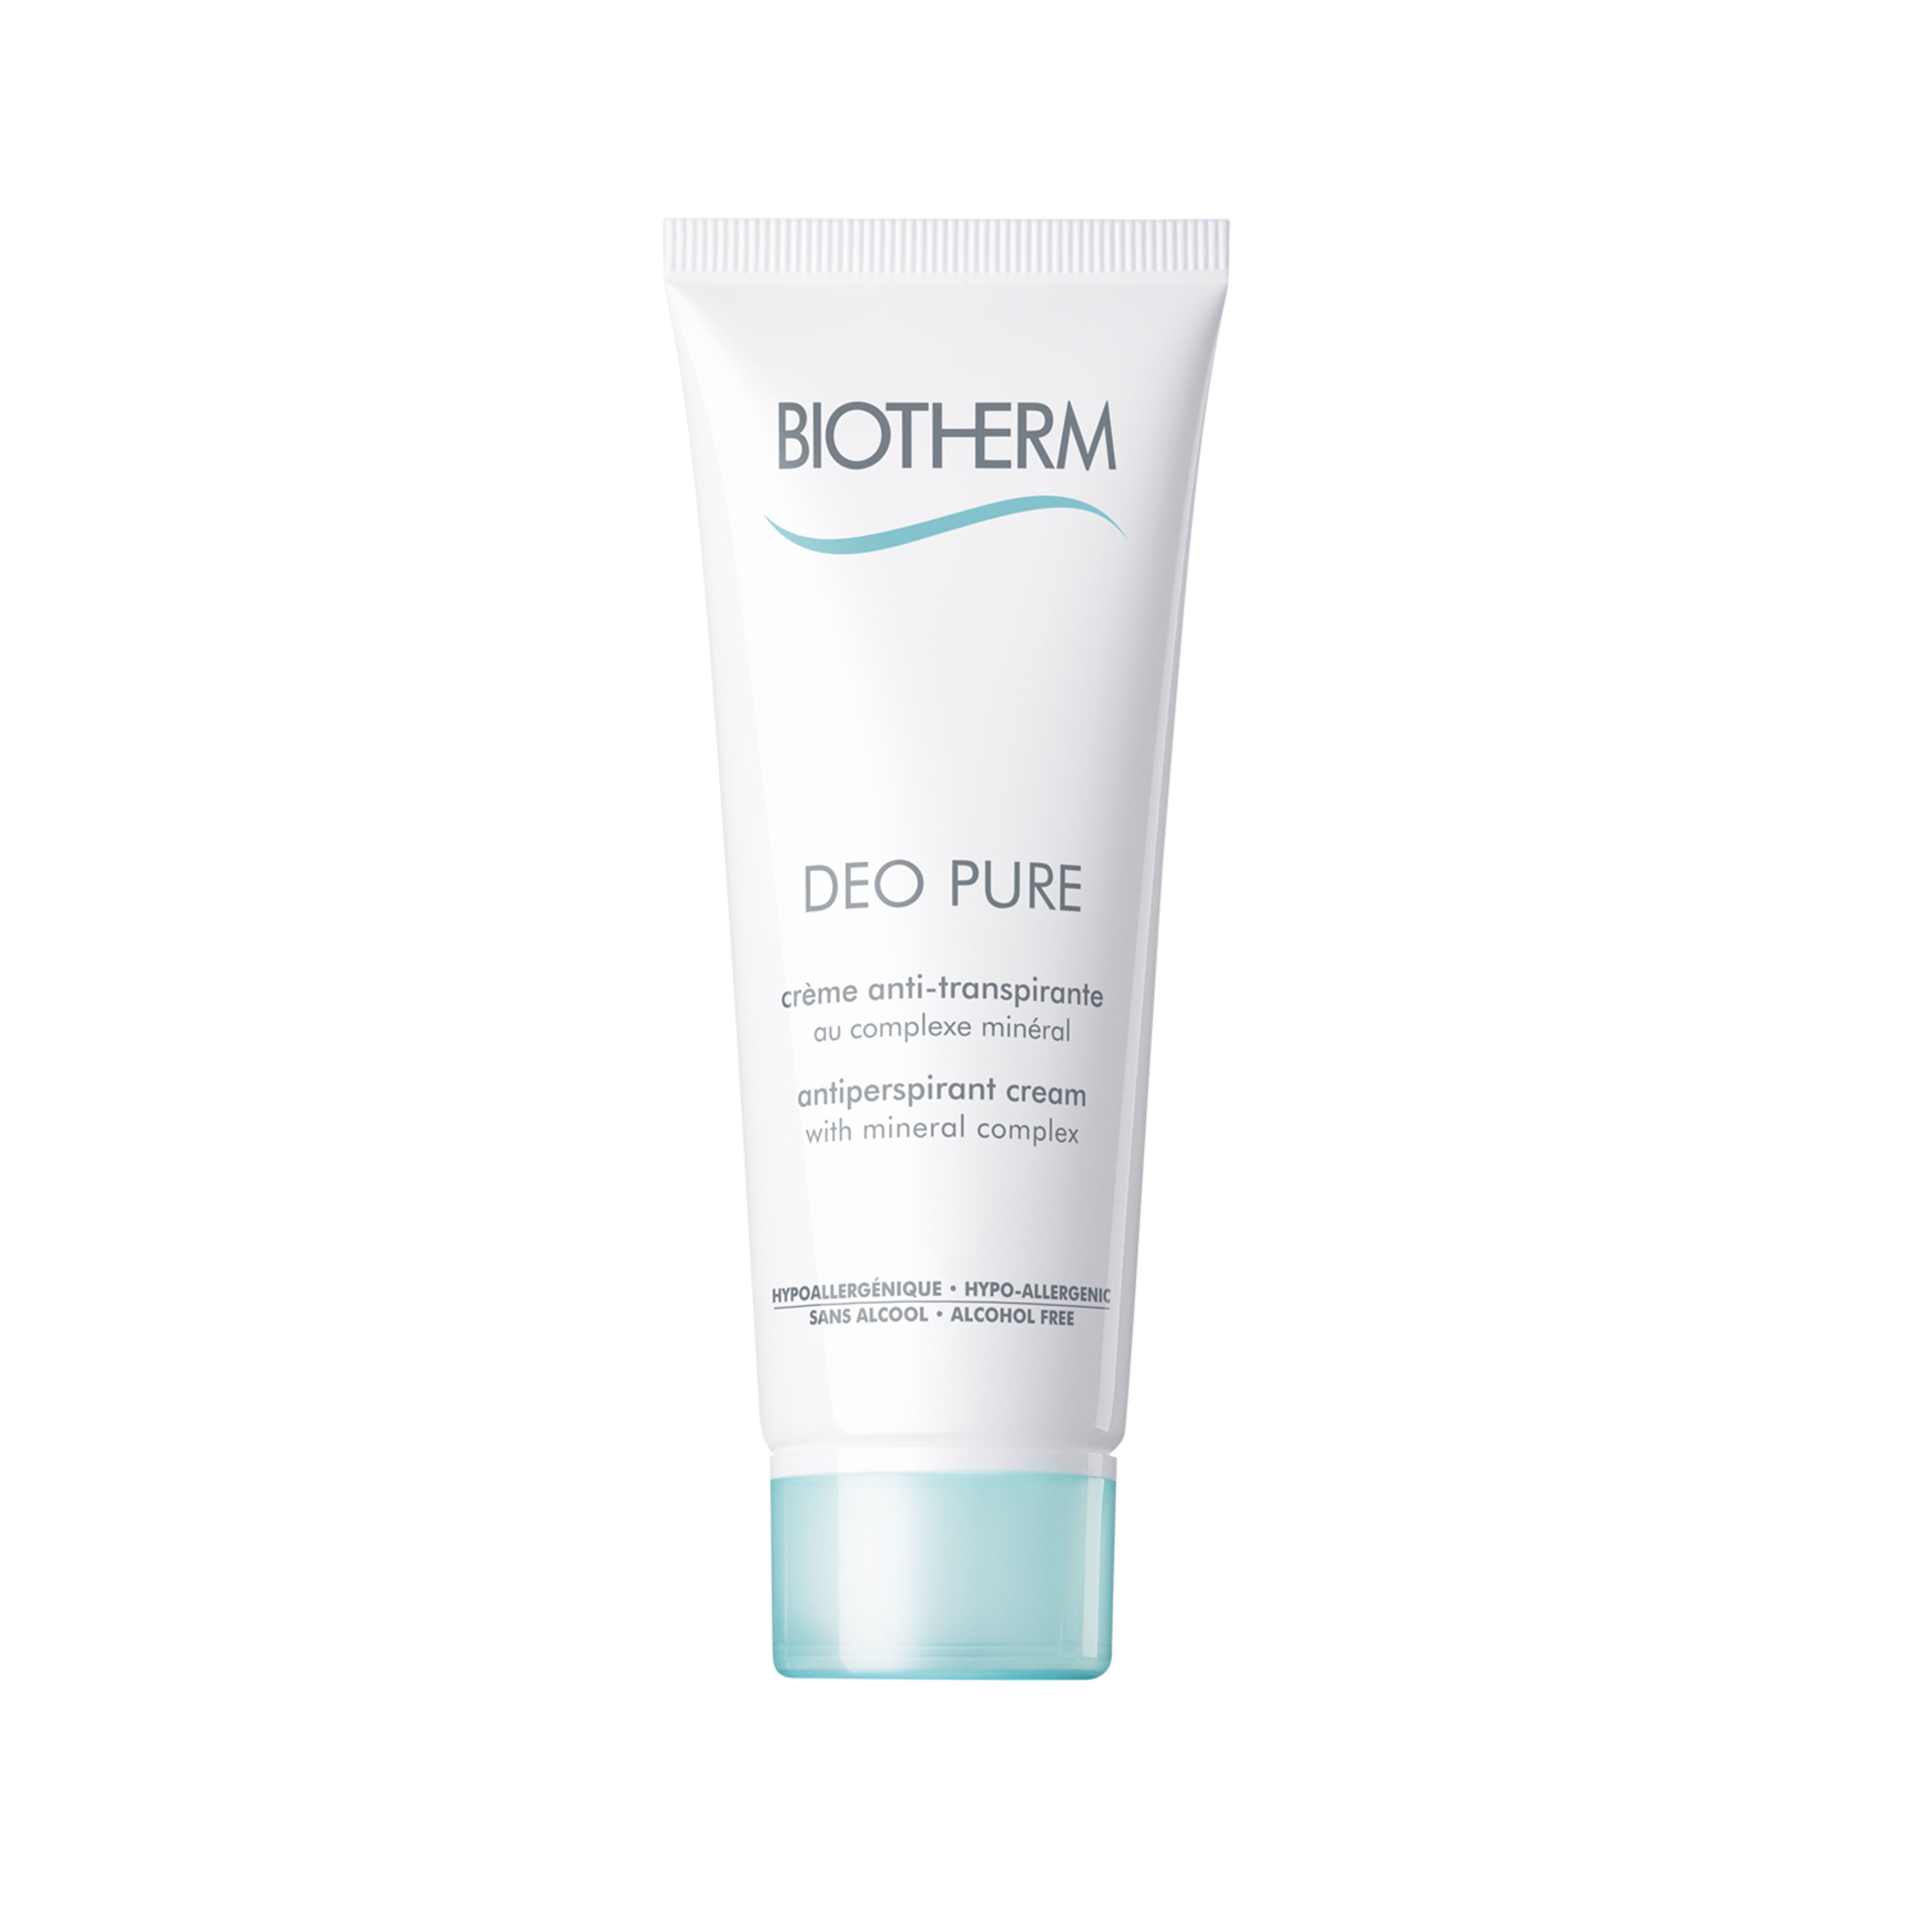 Deo Pure Creme Biotherm 1